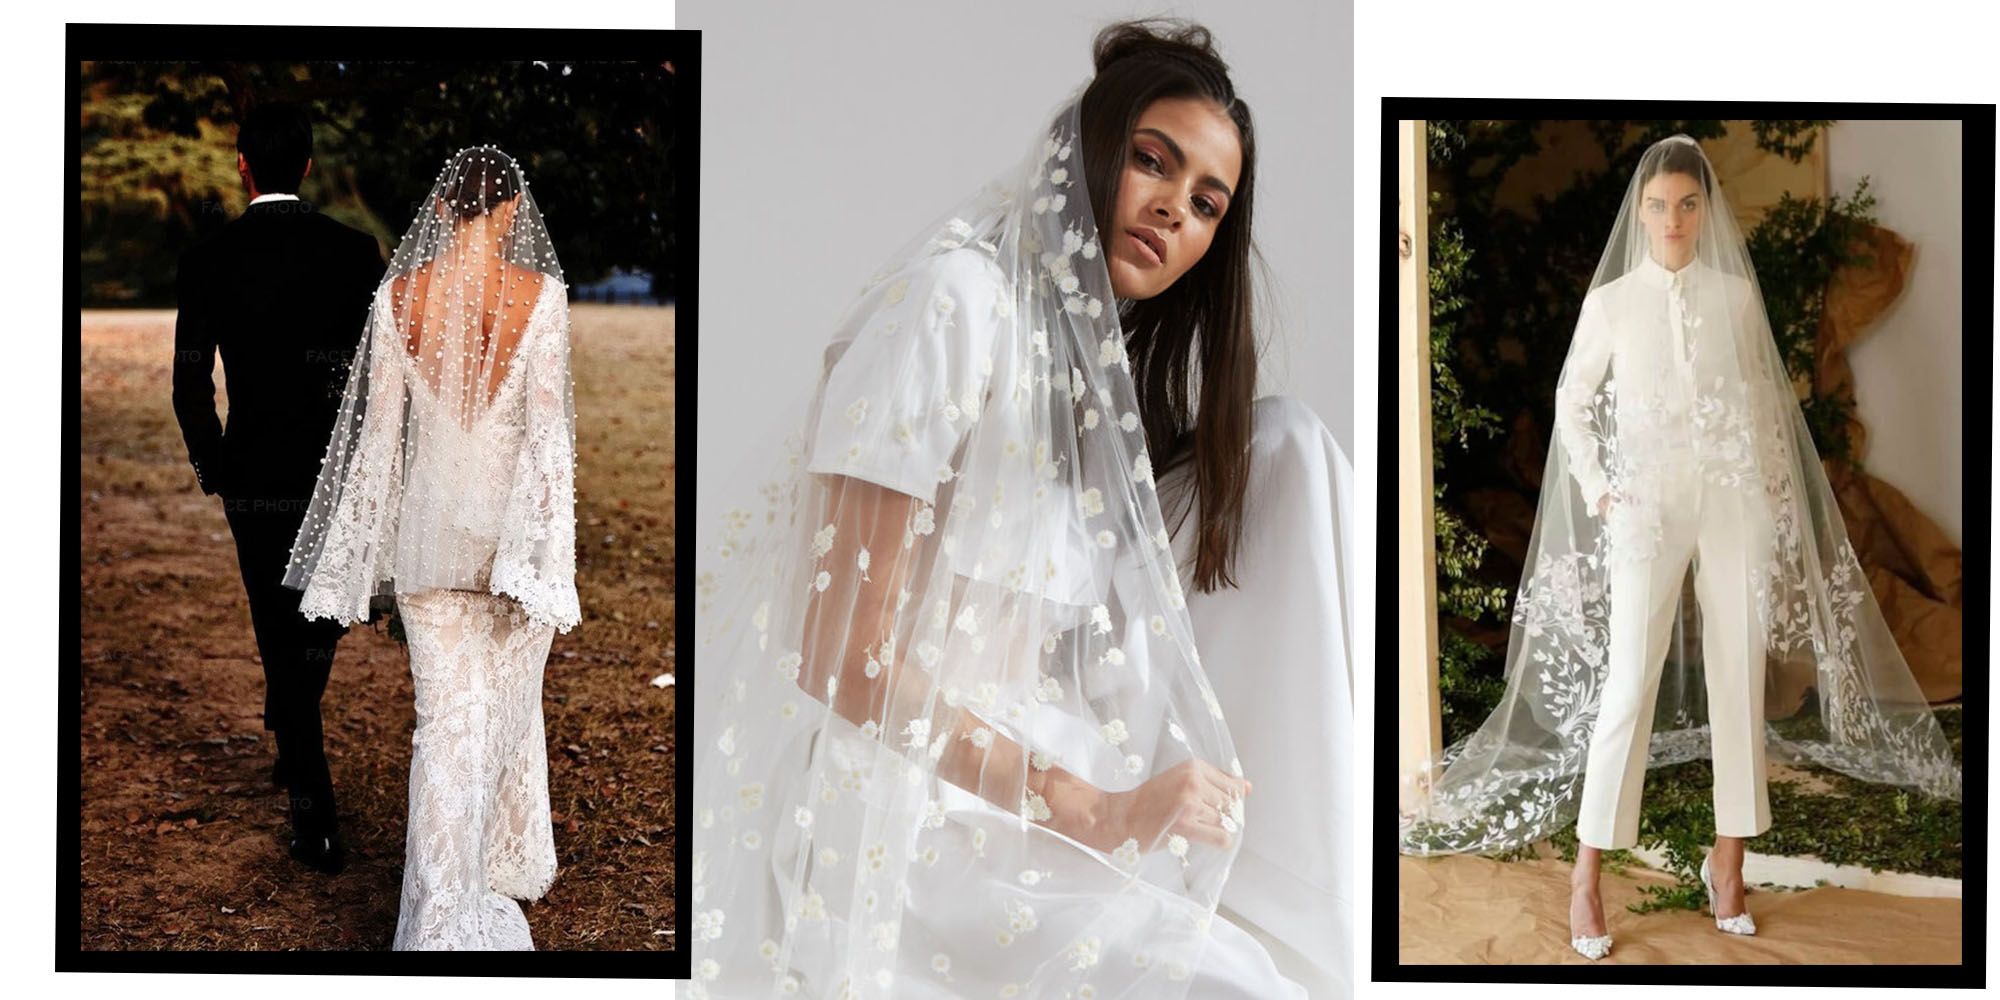 16 Wedding Veils To Buy Now To Accessorise A Bridal Outfit